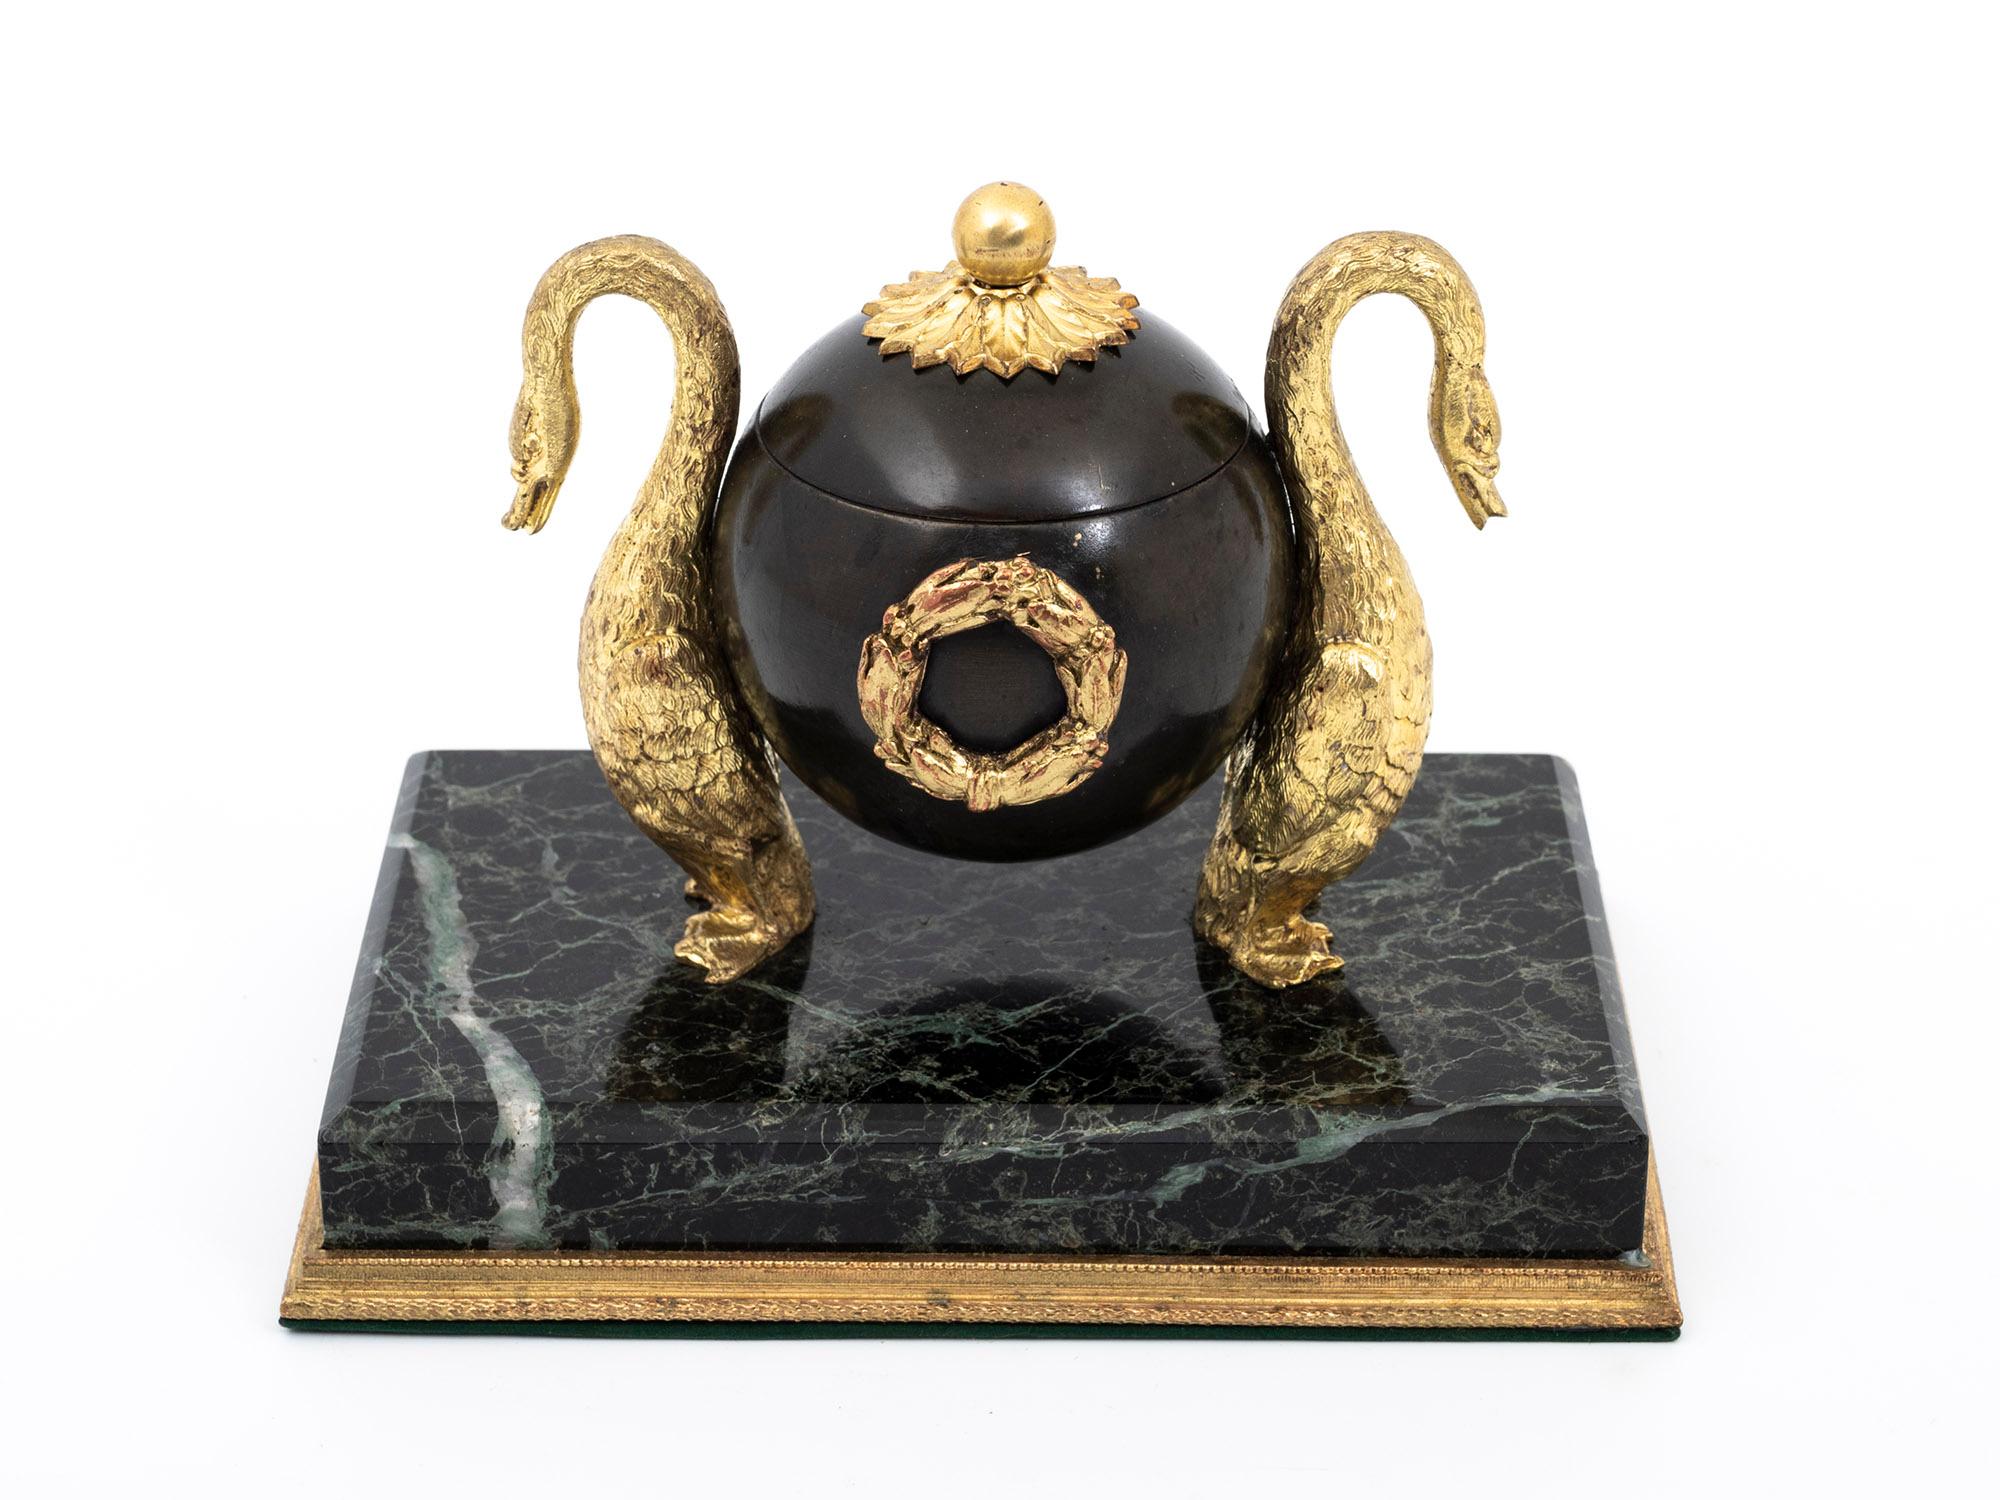 A beautiful Regency bronze gilded Inkwell standing on a green marble base.

An elegant green marble base supports this stunning Regency Inkwell, which boasts unique features such as a spherical design exquisitely adorned with two gilt swans; an